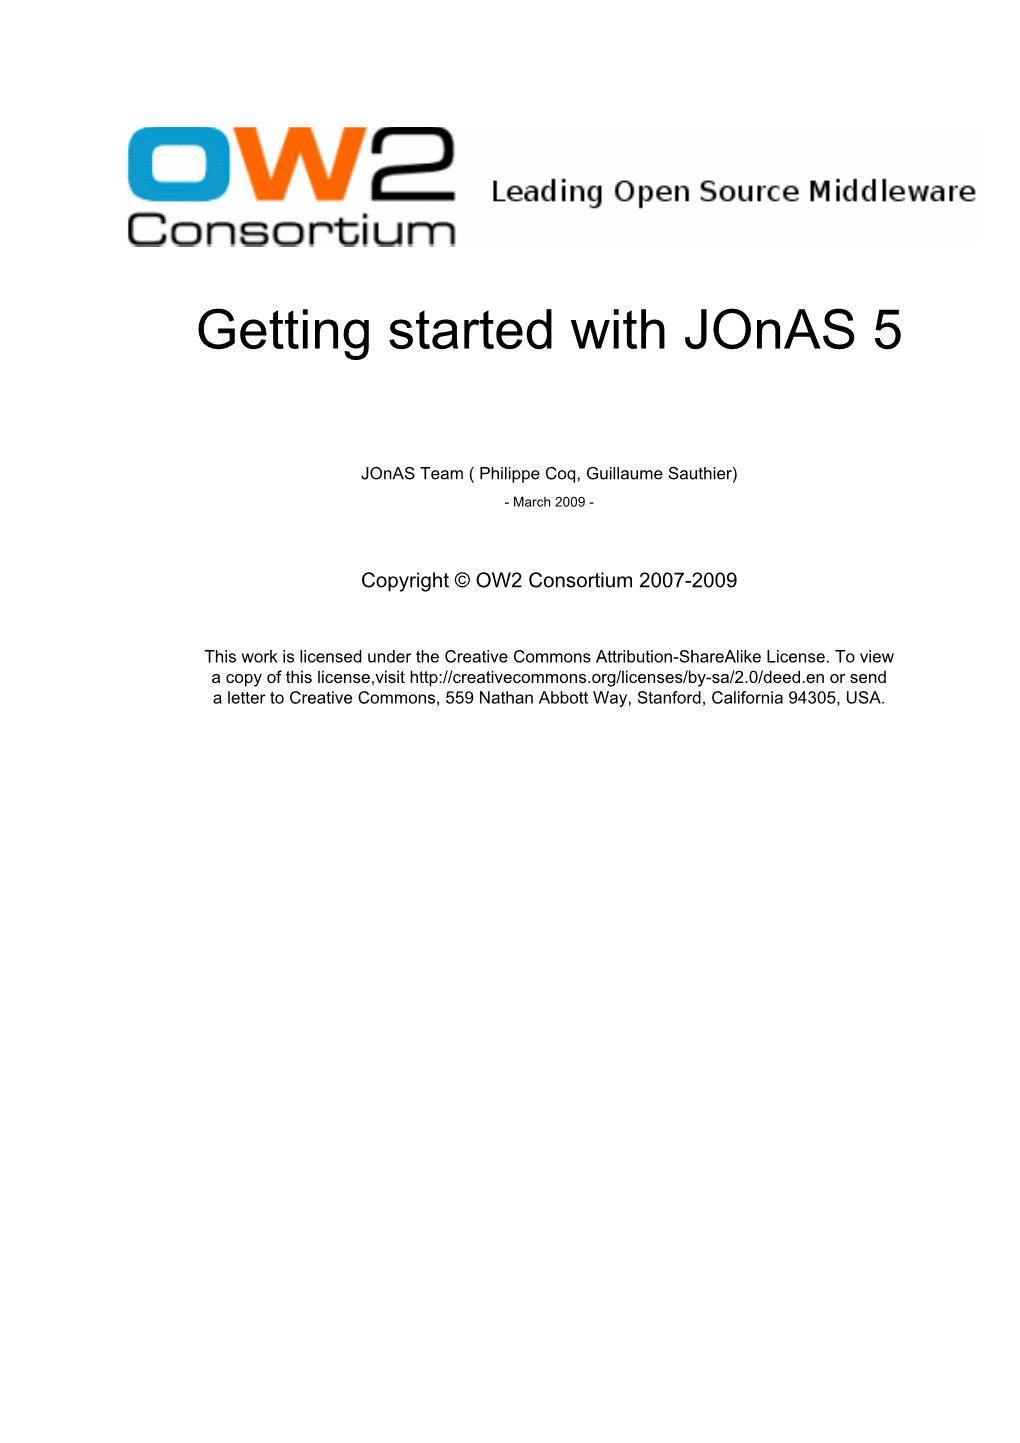 Getting Started with Jonas 5